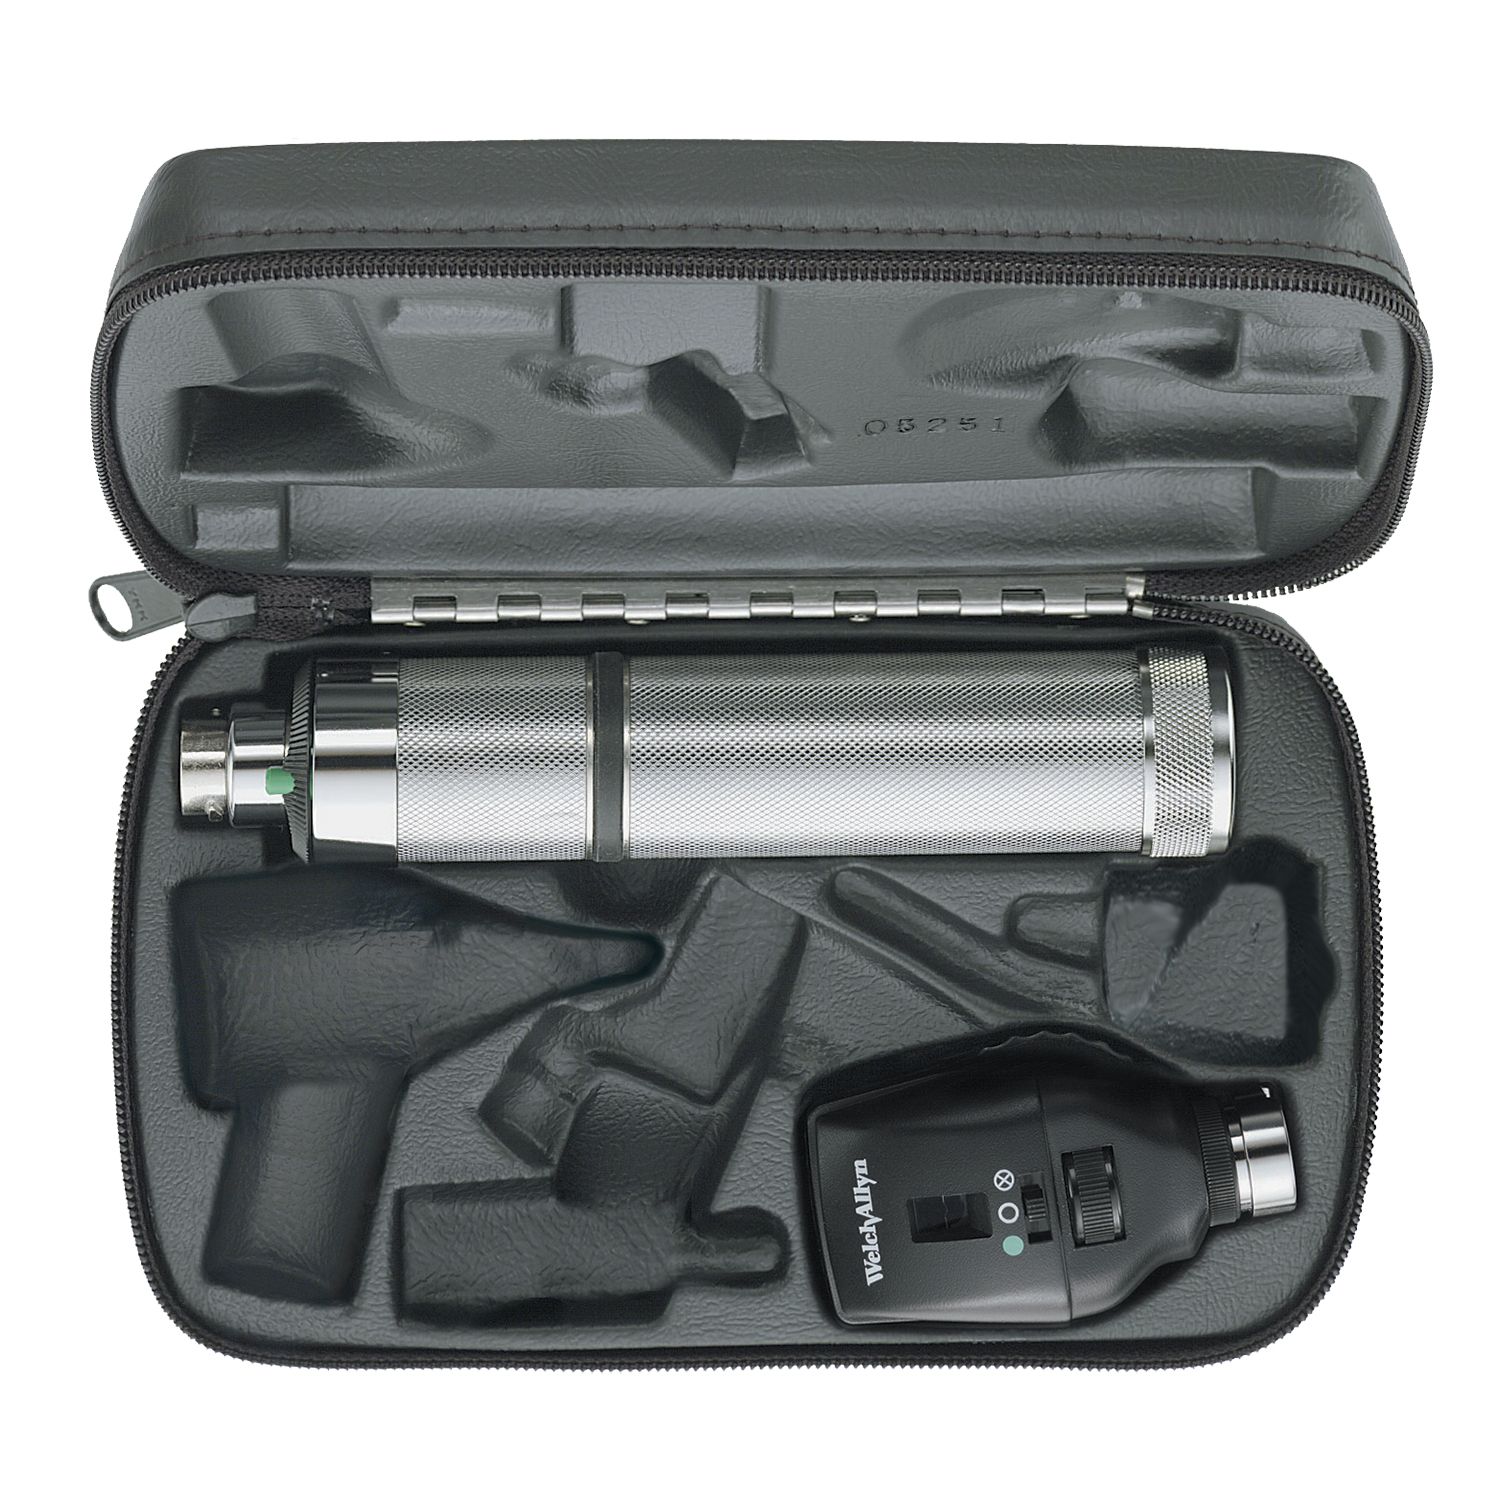 Welch Allyn Elite Ophthalmoscope with C-cell Handle